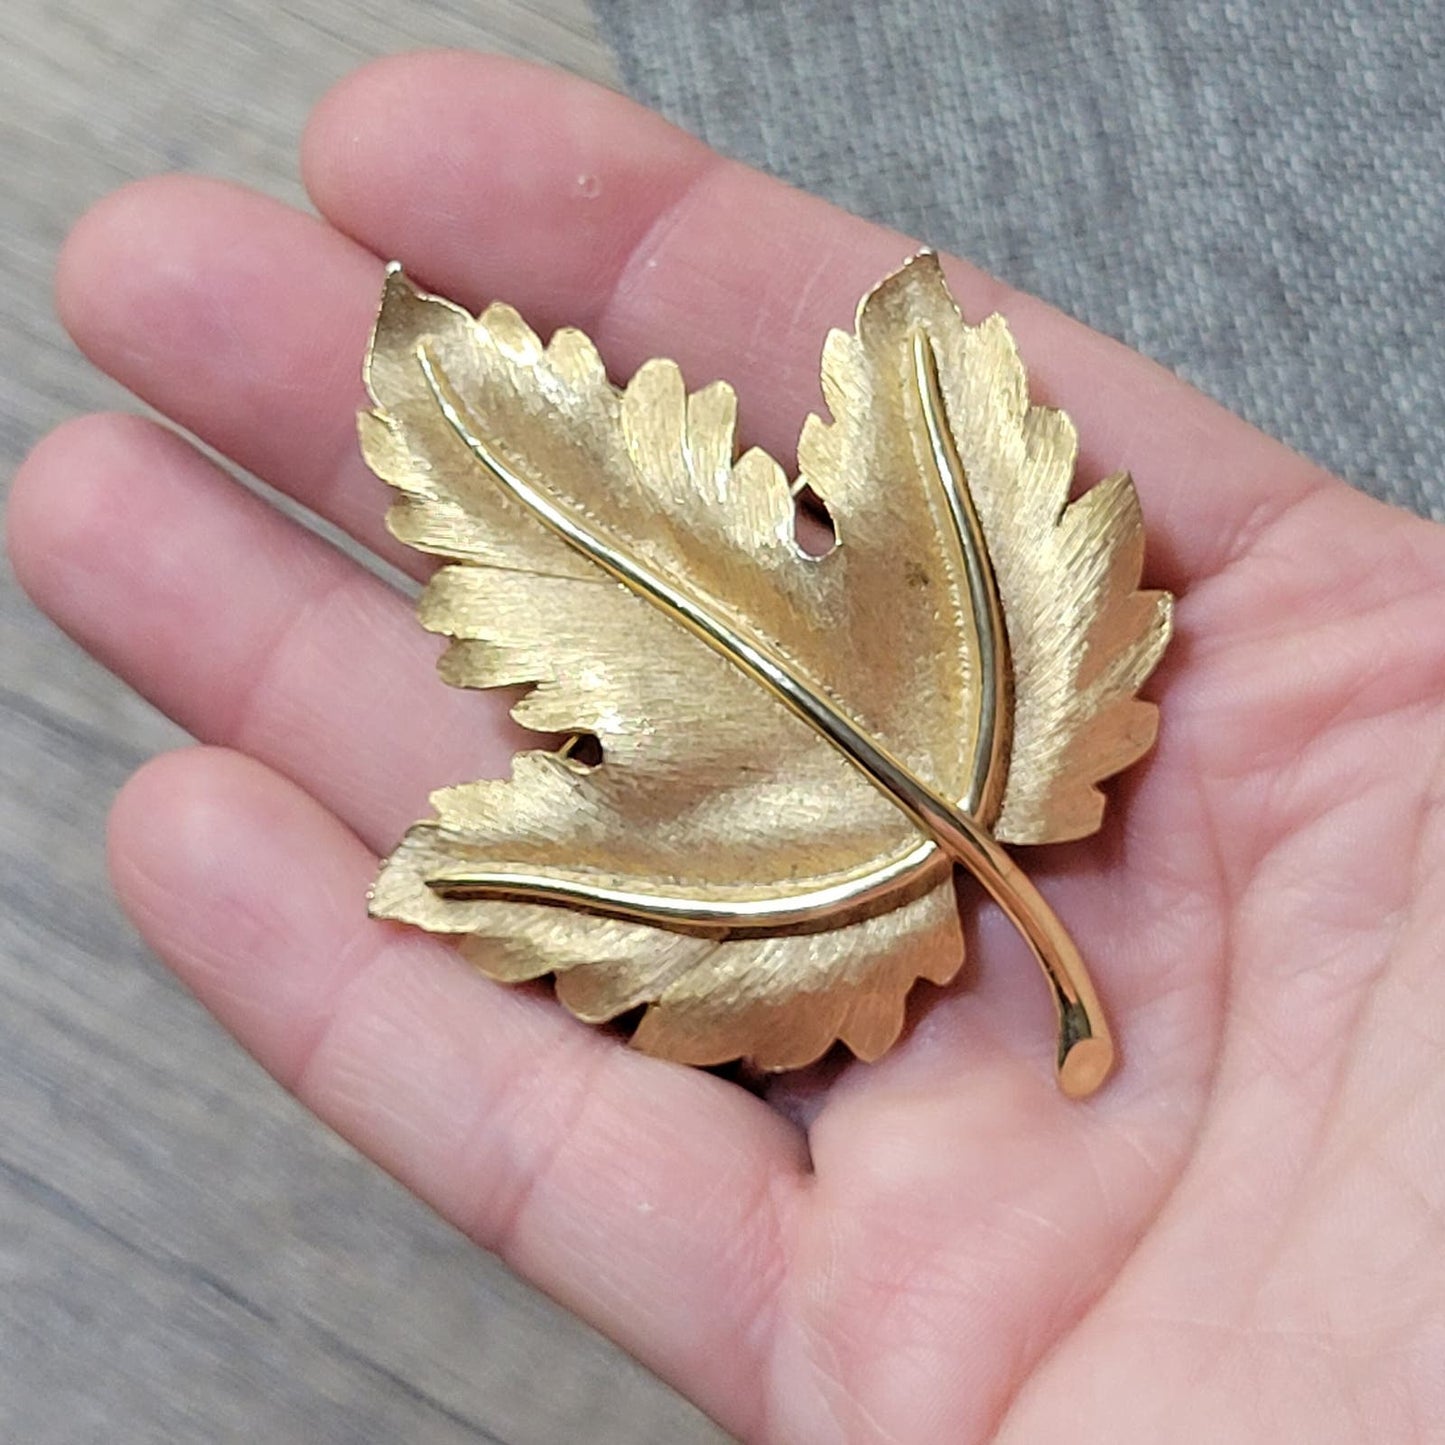 Leaf brooch Crown Trifari signed vintage 1960s brushed gold-tone jewelry